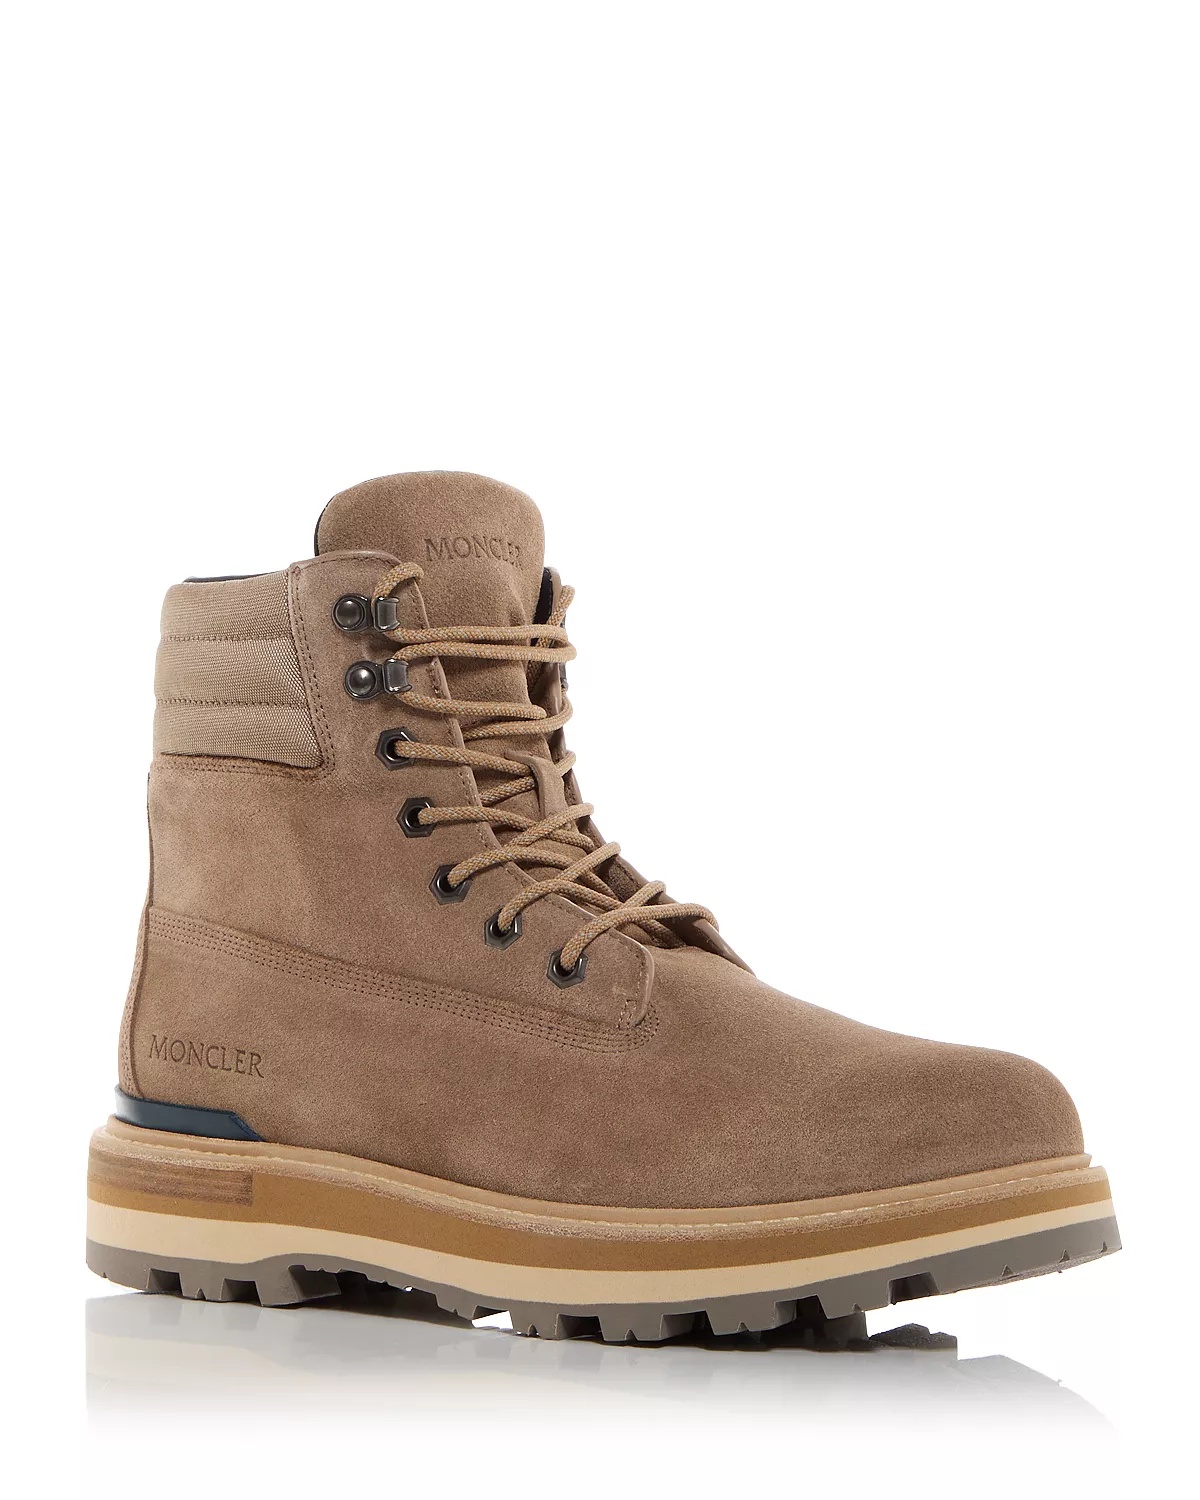 Men's Peka Derby Hiking Boots - 1